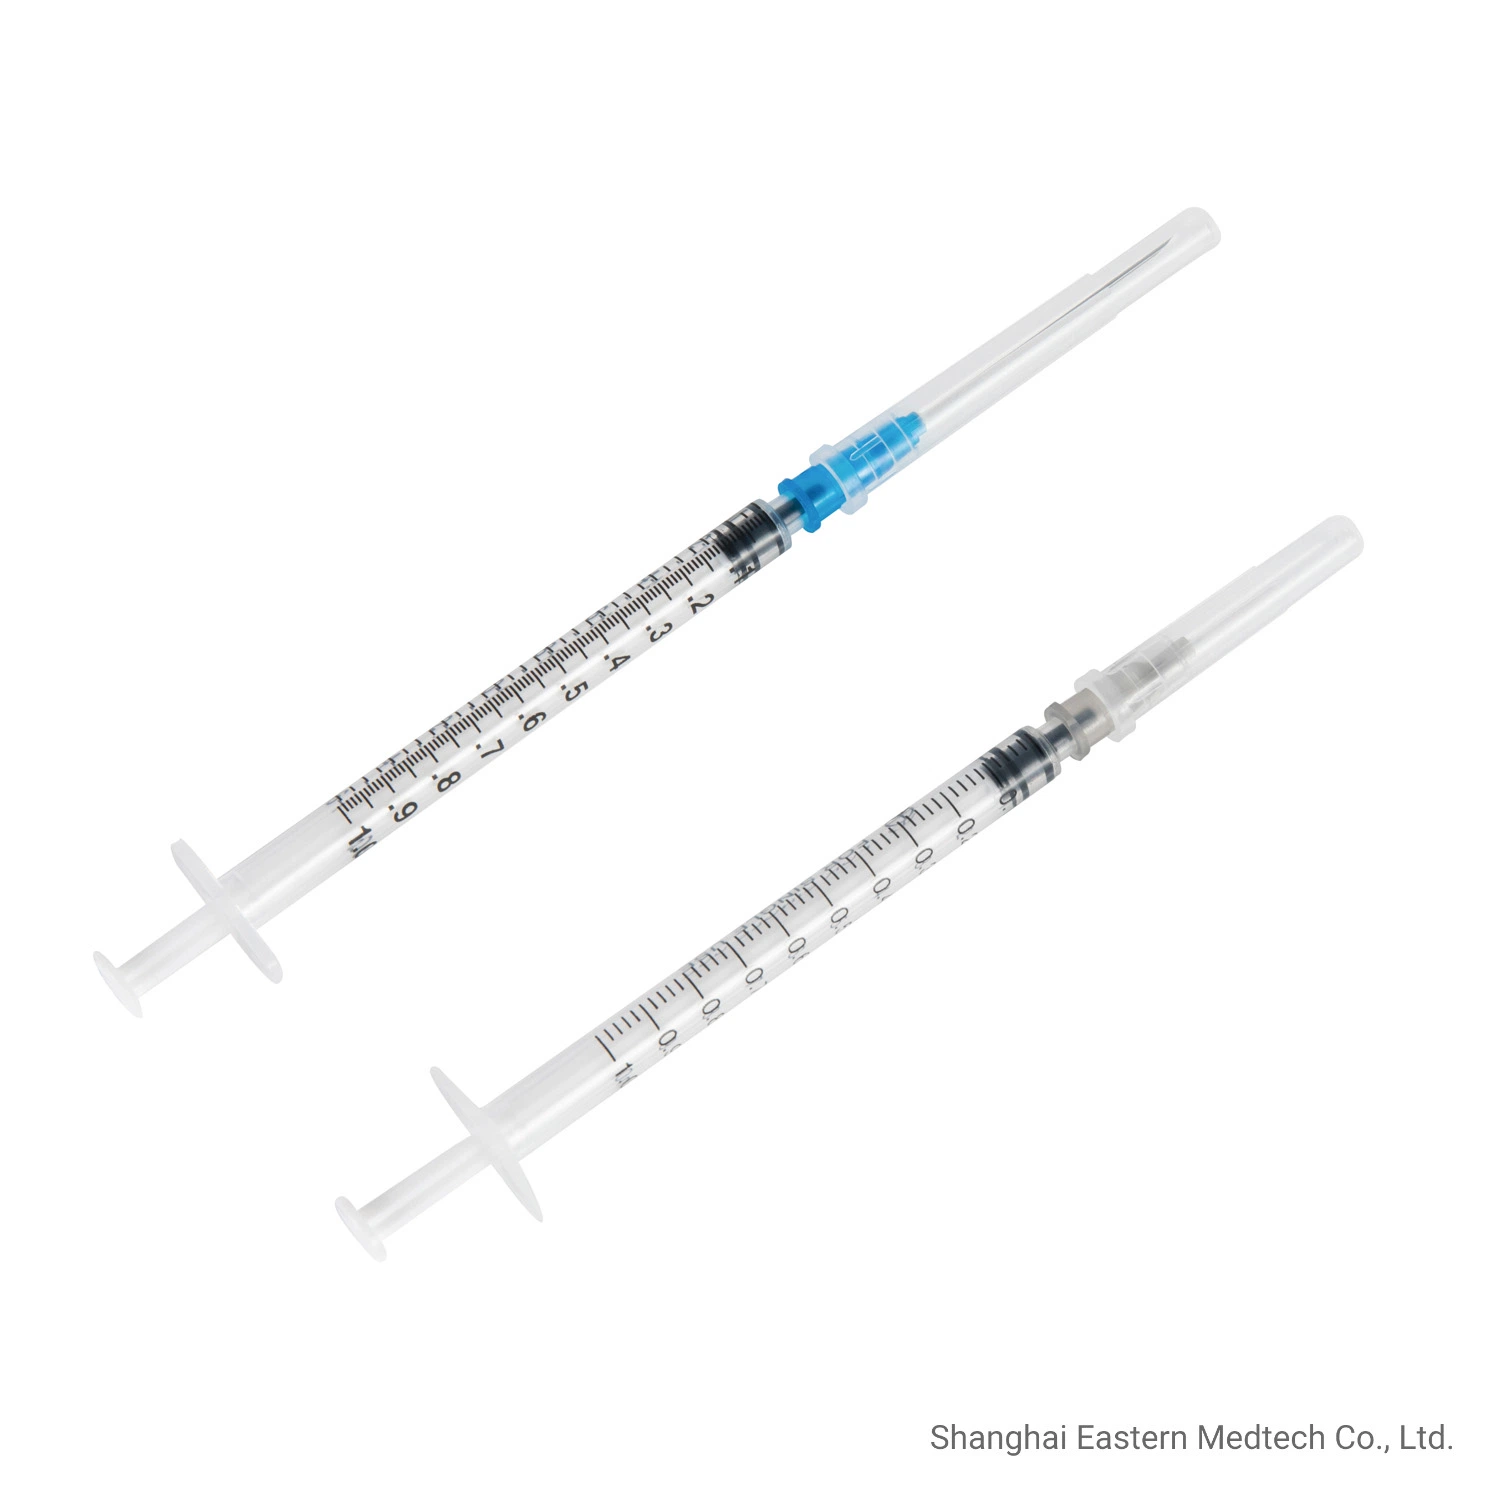 Hospital Instrument Plastic Material Disposable Safety Professional High quality/High cost performance  with Fixed Needle 1ml Vaccine Syringe